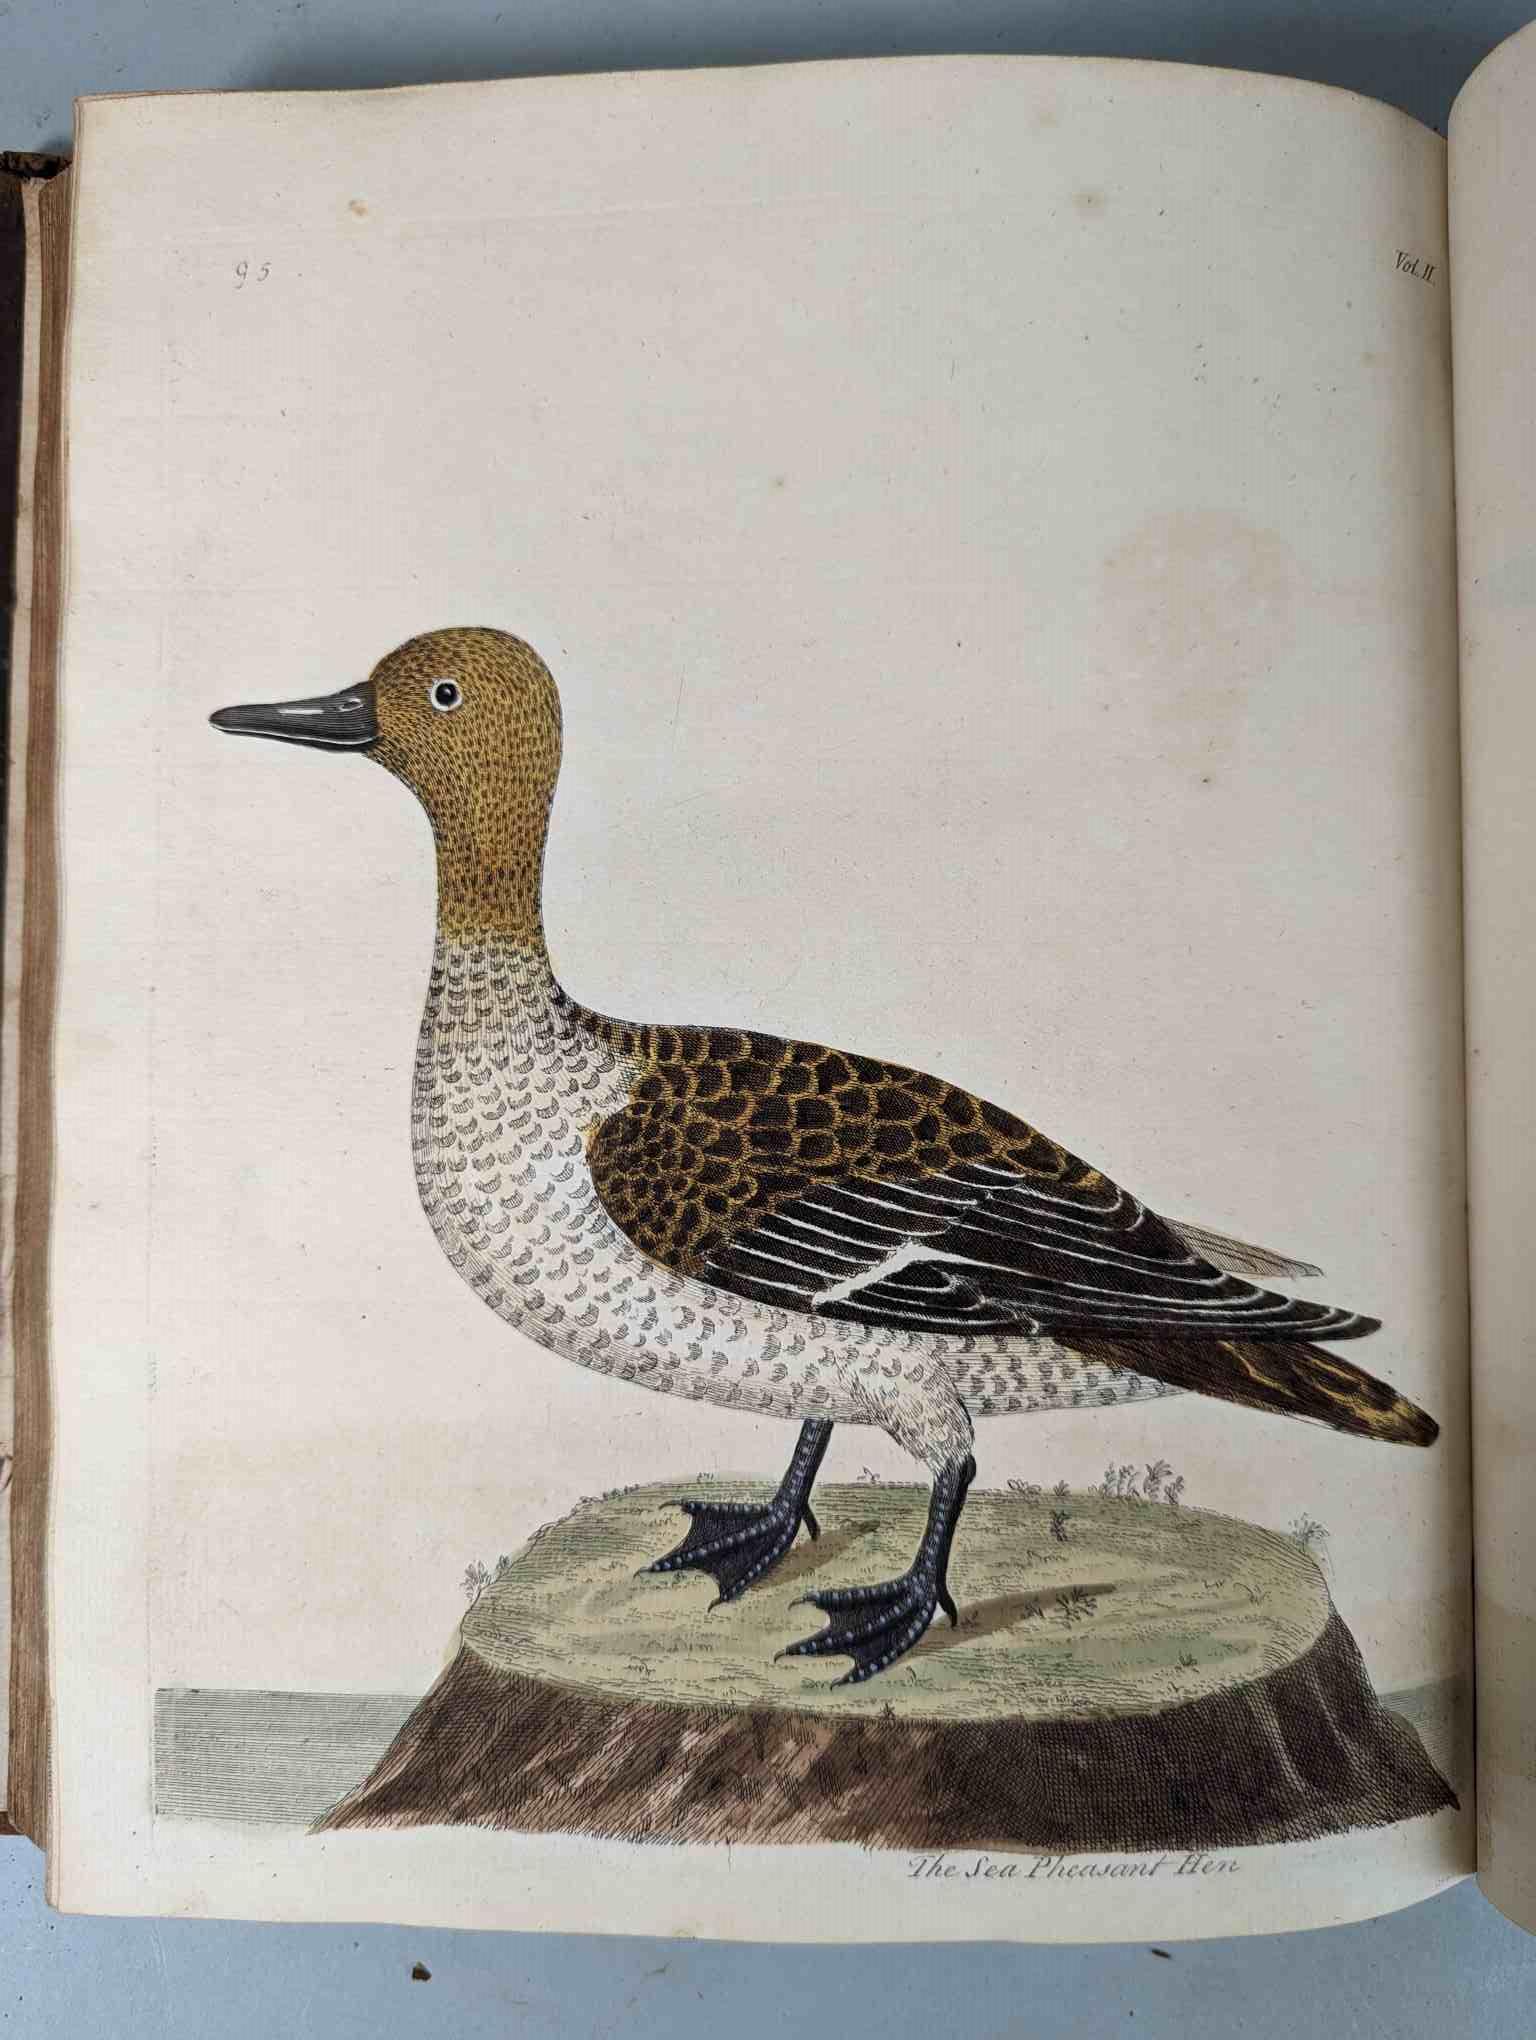 ALBIN, Eleazar. A Natural History of Birds, to which are added, Notes and Observations by W. - Image 198 of 208